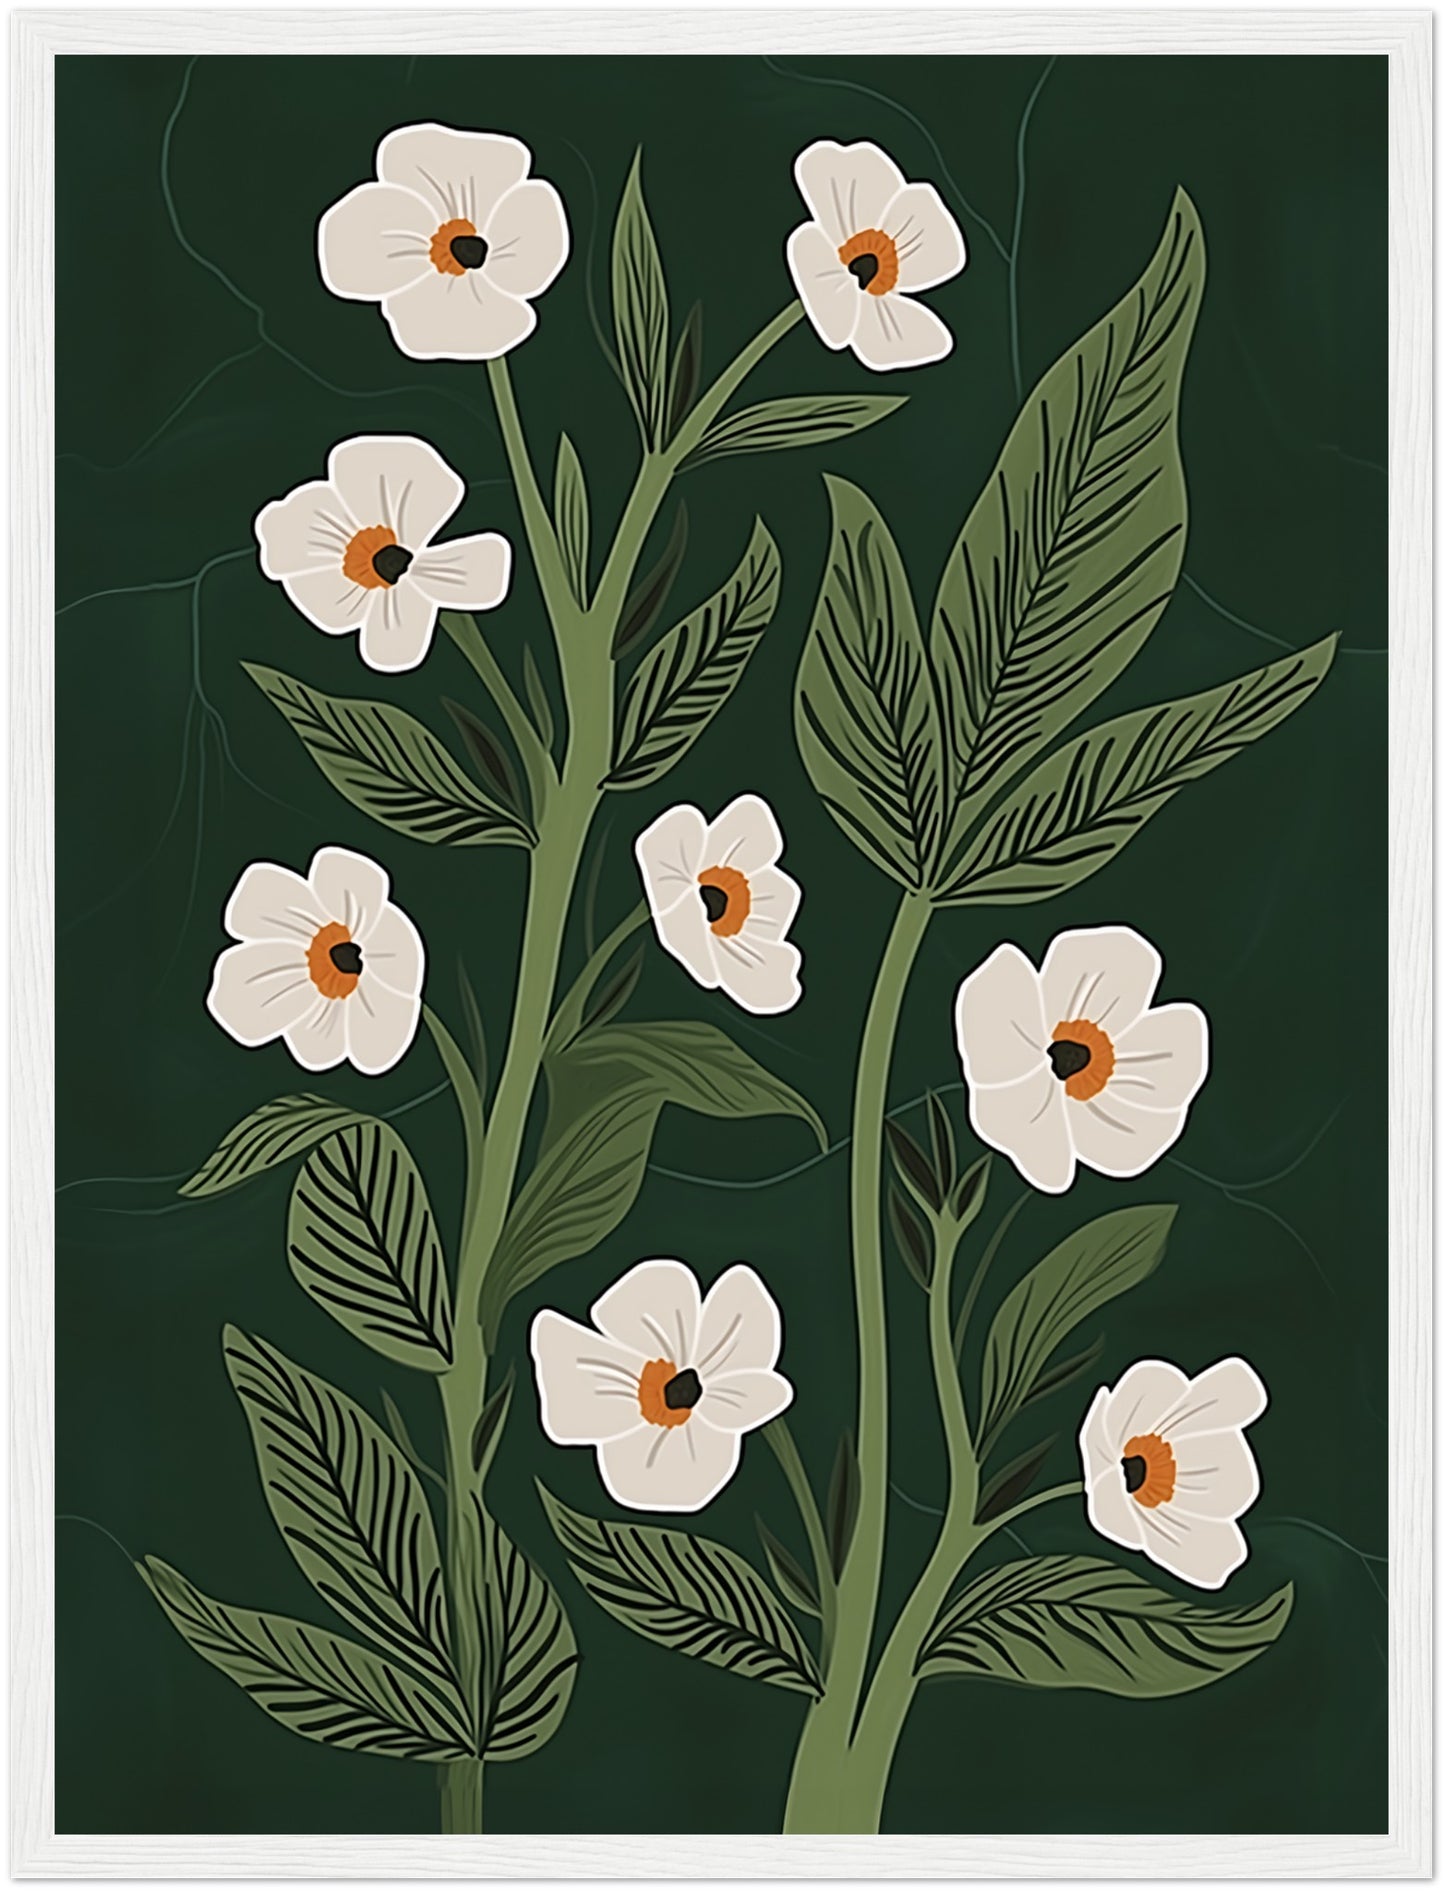 Illustration of white flowers with green leaves on a dark background, framed by a wooden border.